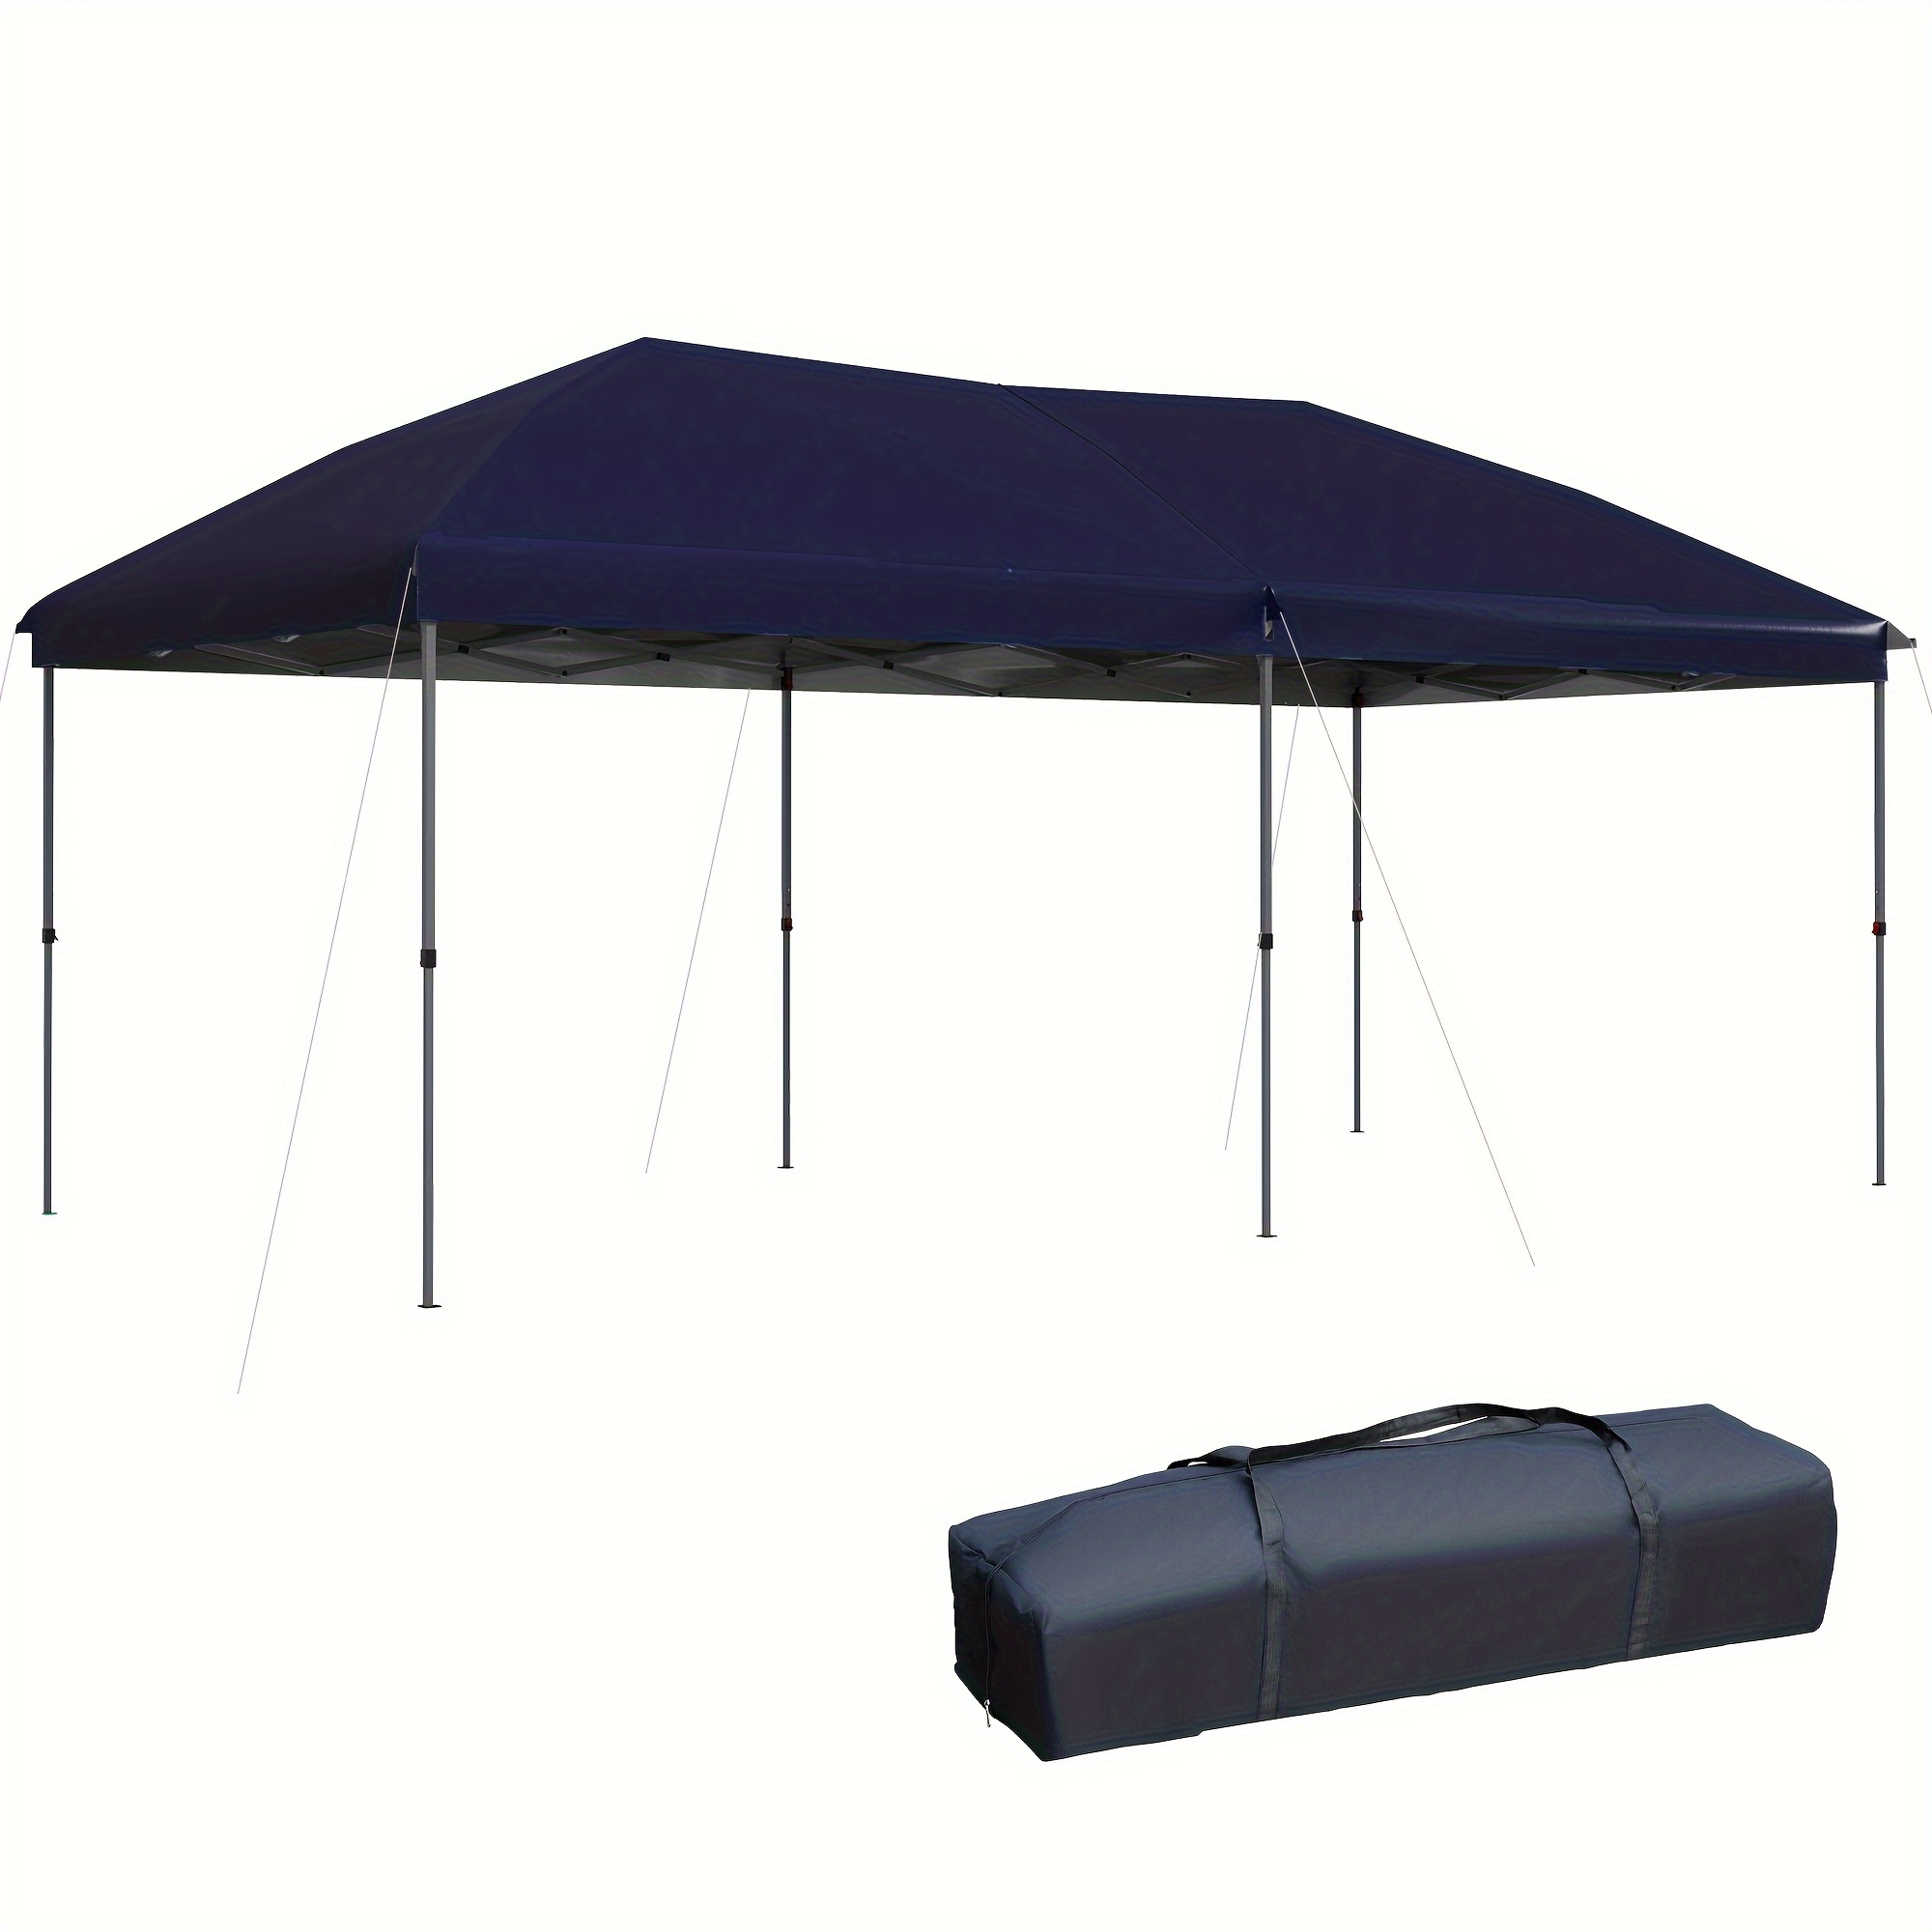 

Outsunny 10' X 19' Pop Up Canopy With Easy Up Steel Frame, 3-level Adjustable Height And Carrying Bag, Sun Shade Event Party Tent For Patio, Backyard, Garden, Blue